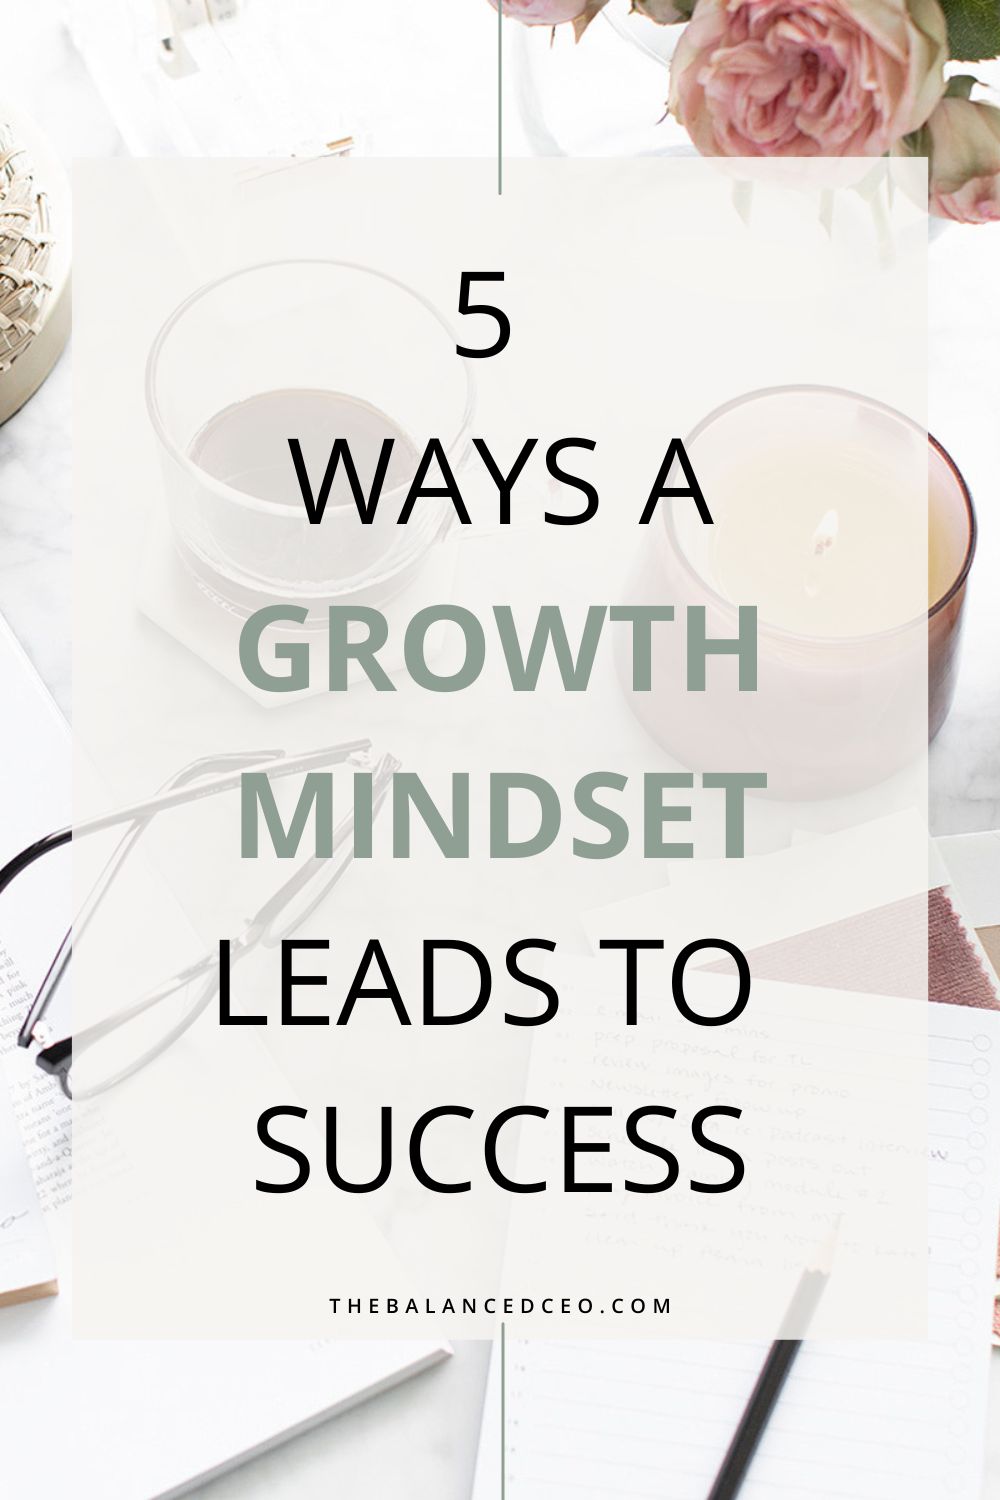 5 Ways a Growth Mindset Leads to Success